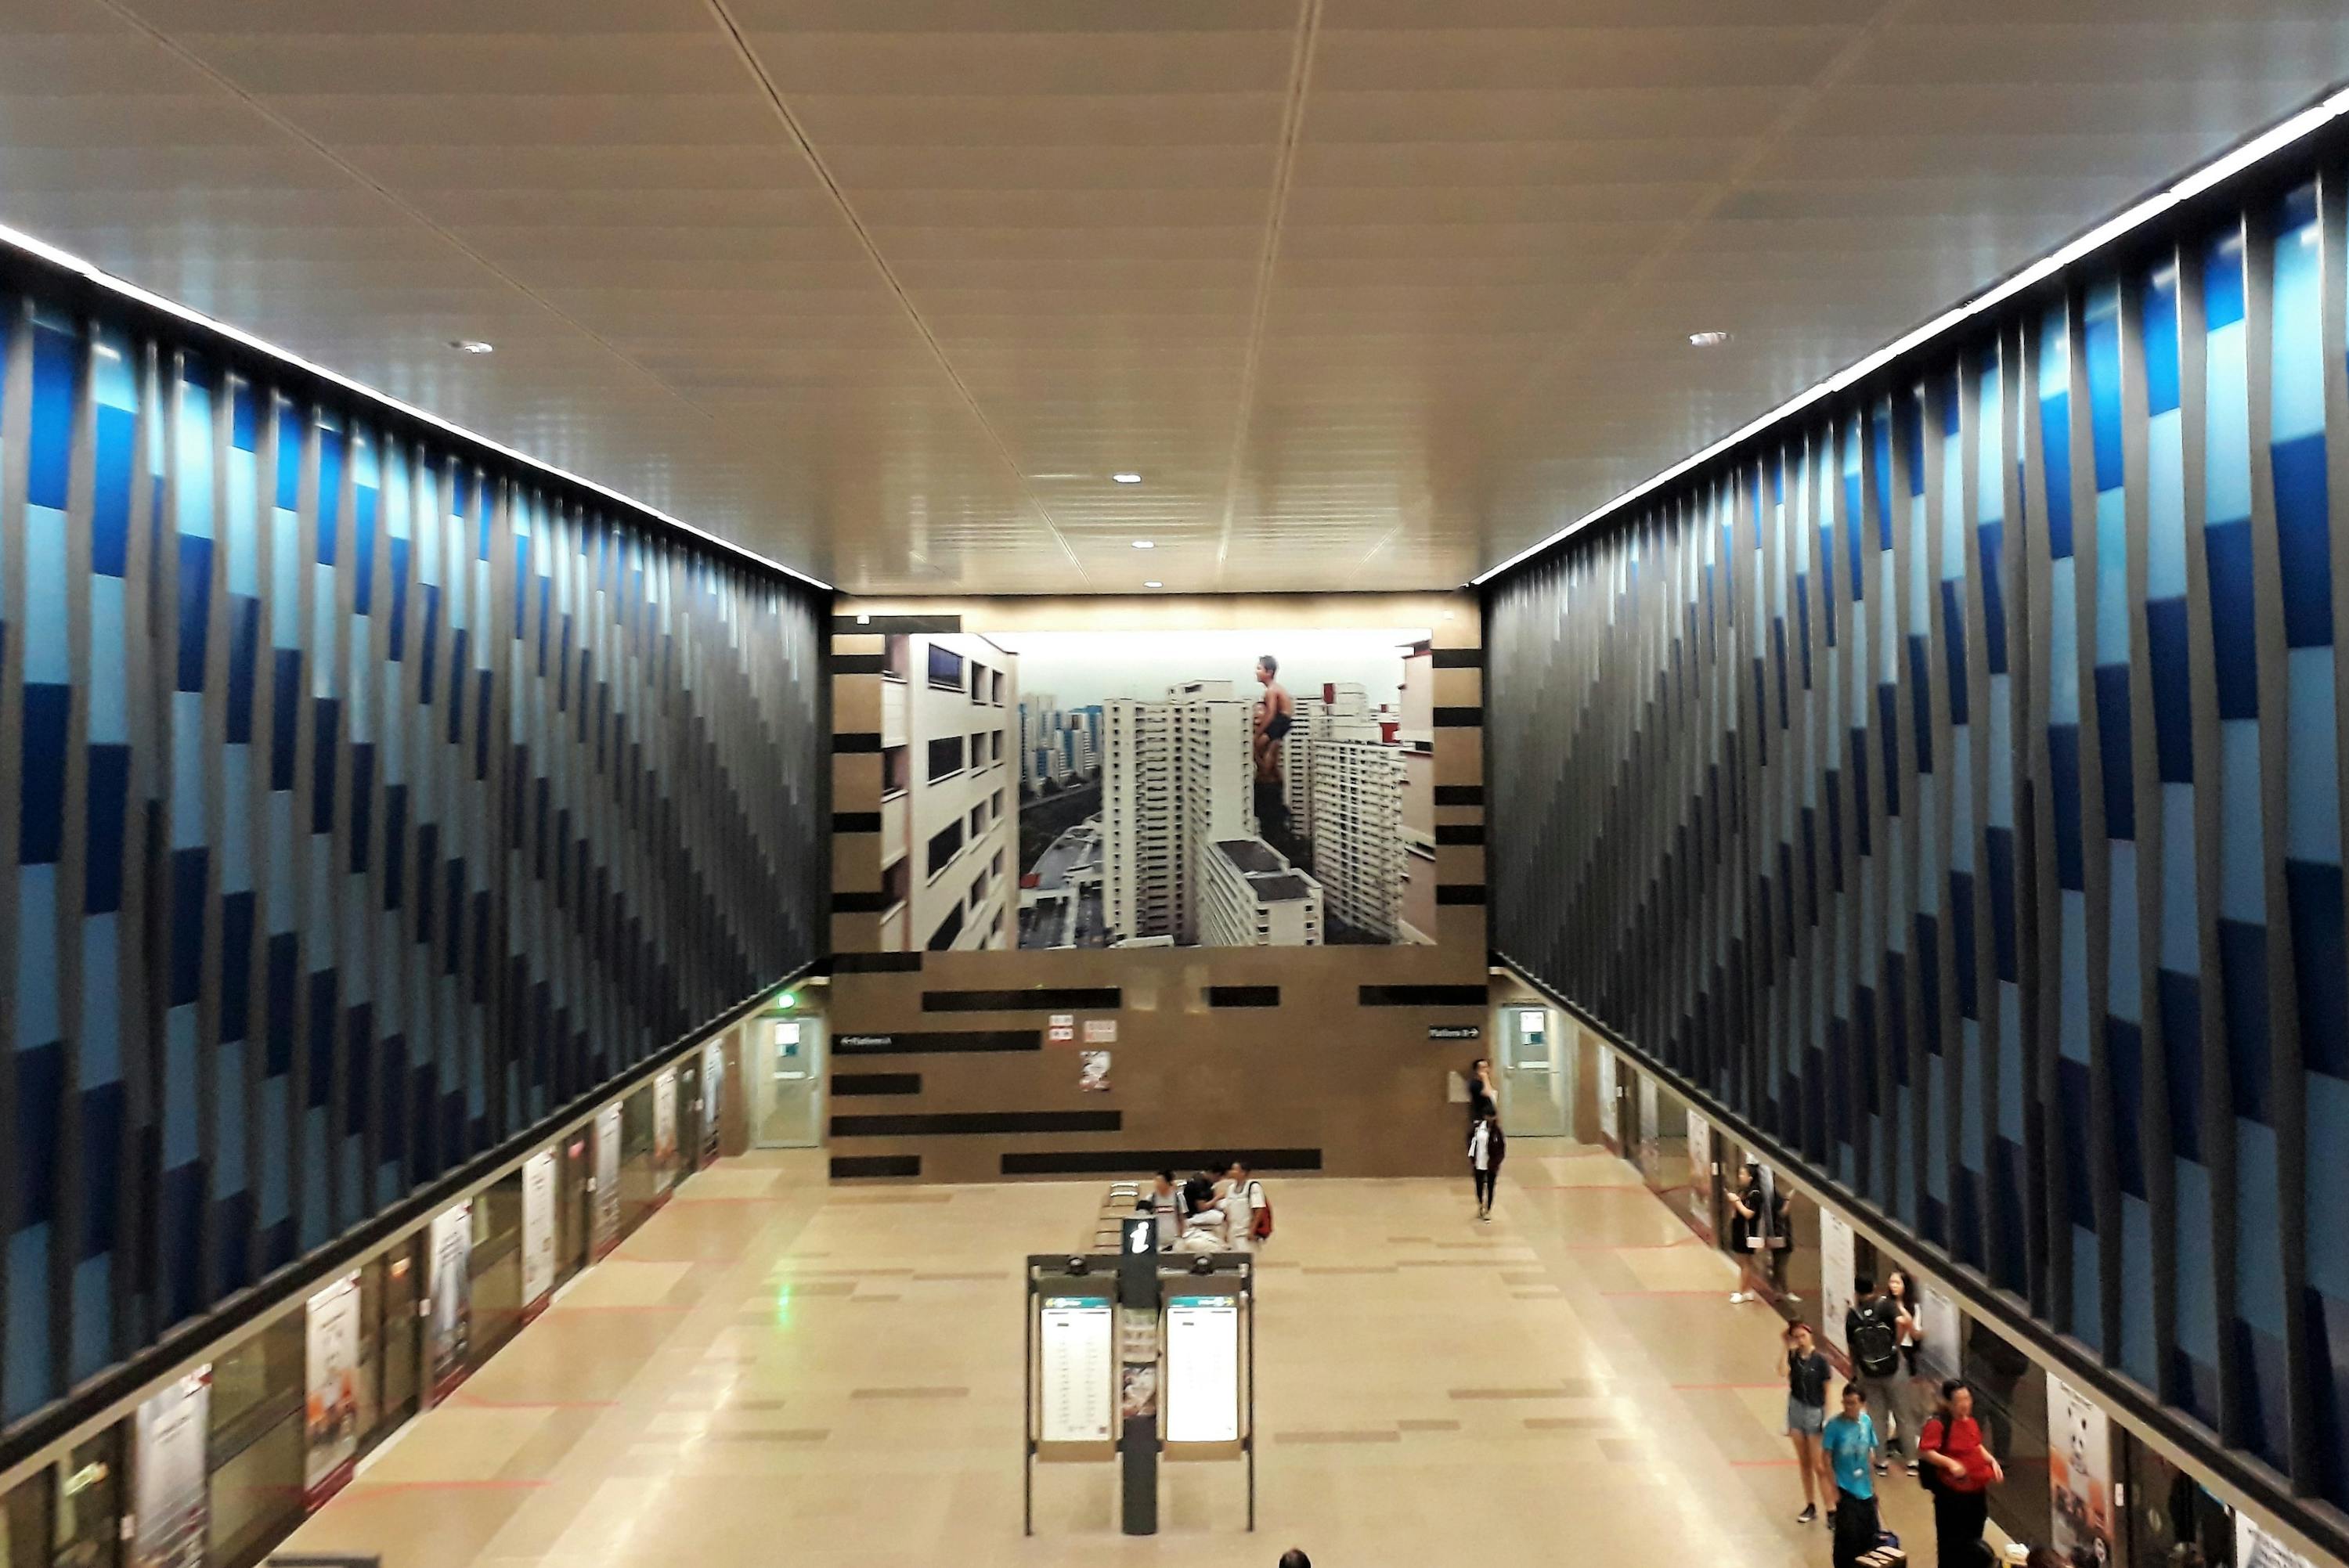 Bukit Panjang MRT Station on the Downtown Line with blue accents